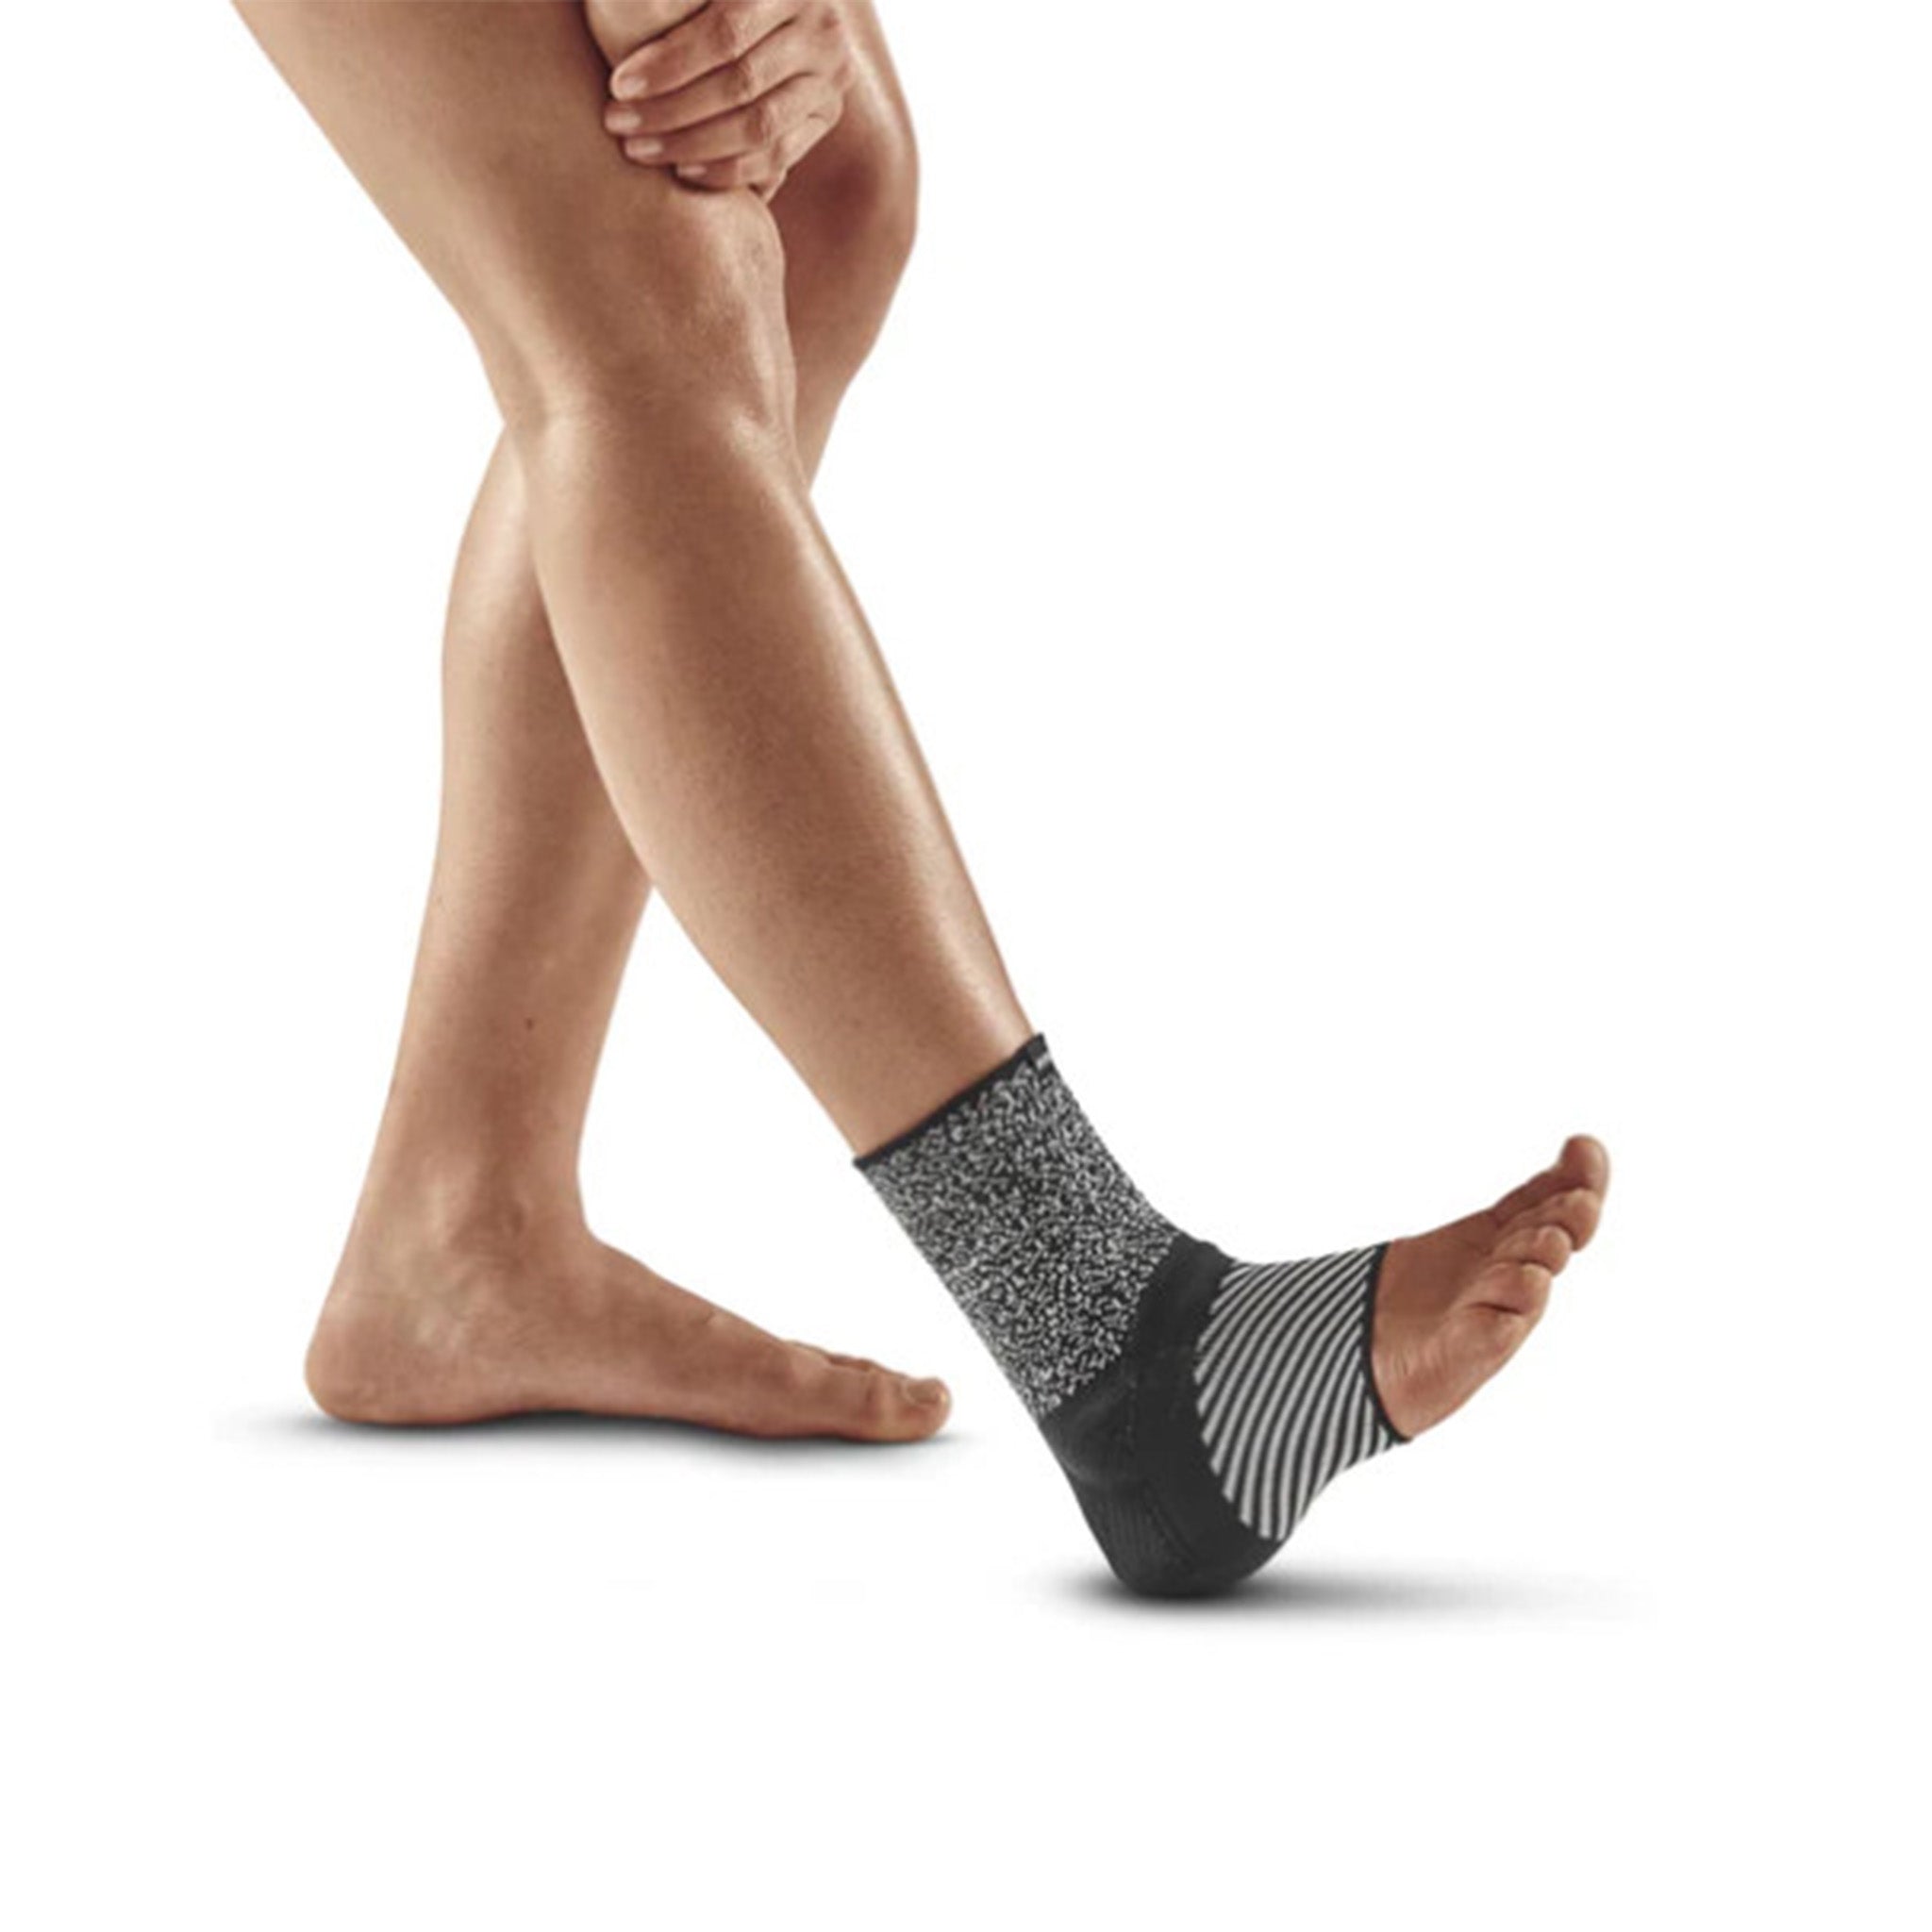 CEP max support, ankle sleeve, unisex